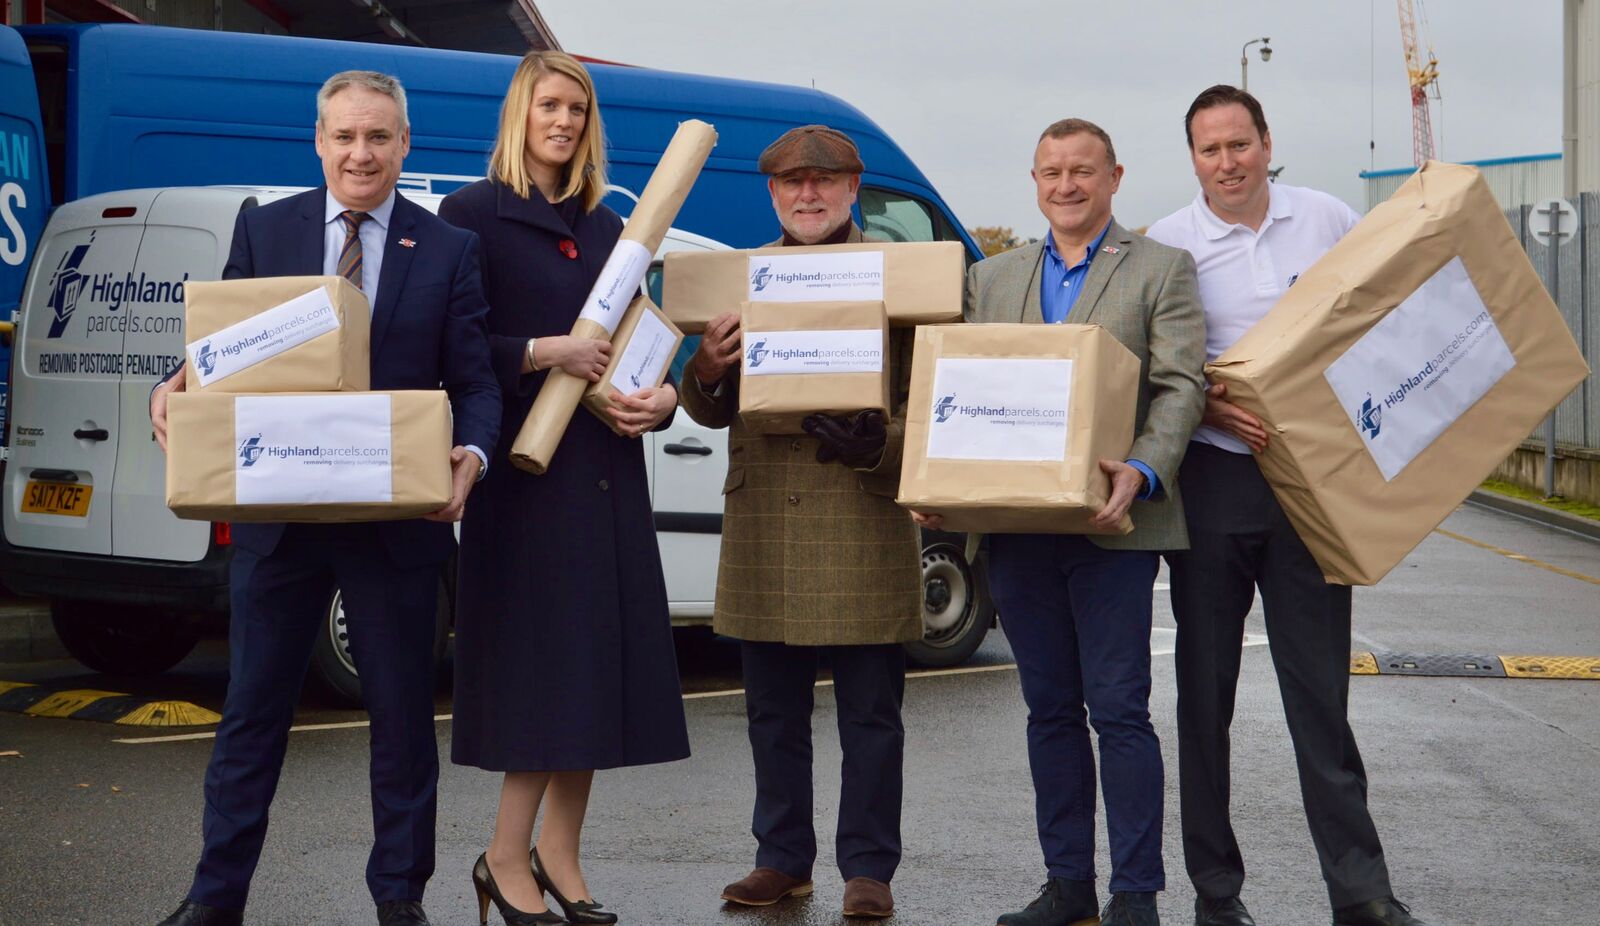 Richard Lochhead MSP, Fishbox director Fiona Houston, businessman Willie Cameron, Drew Hendry MP and Menzies Distribution general manager Fraser MacLean at the launch of the Highland Parcels delivery service.